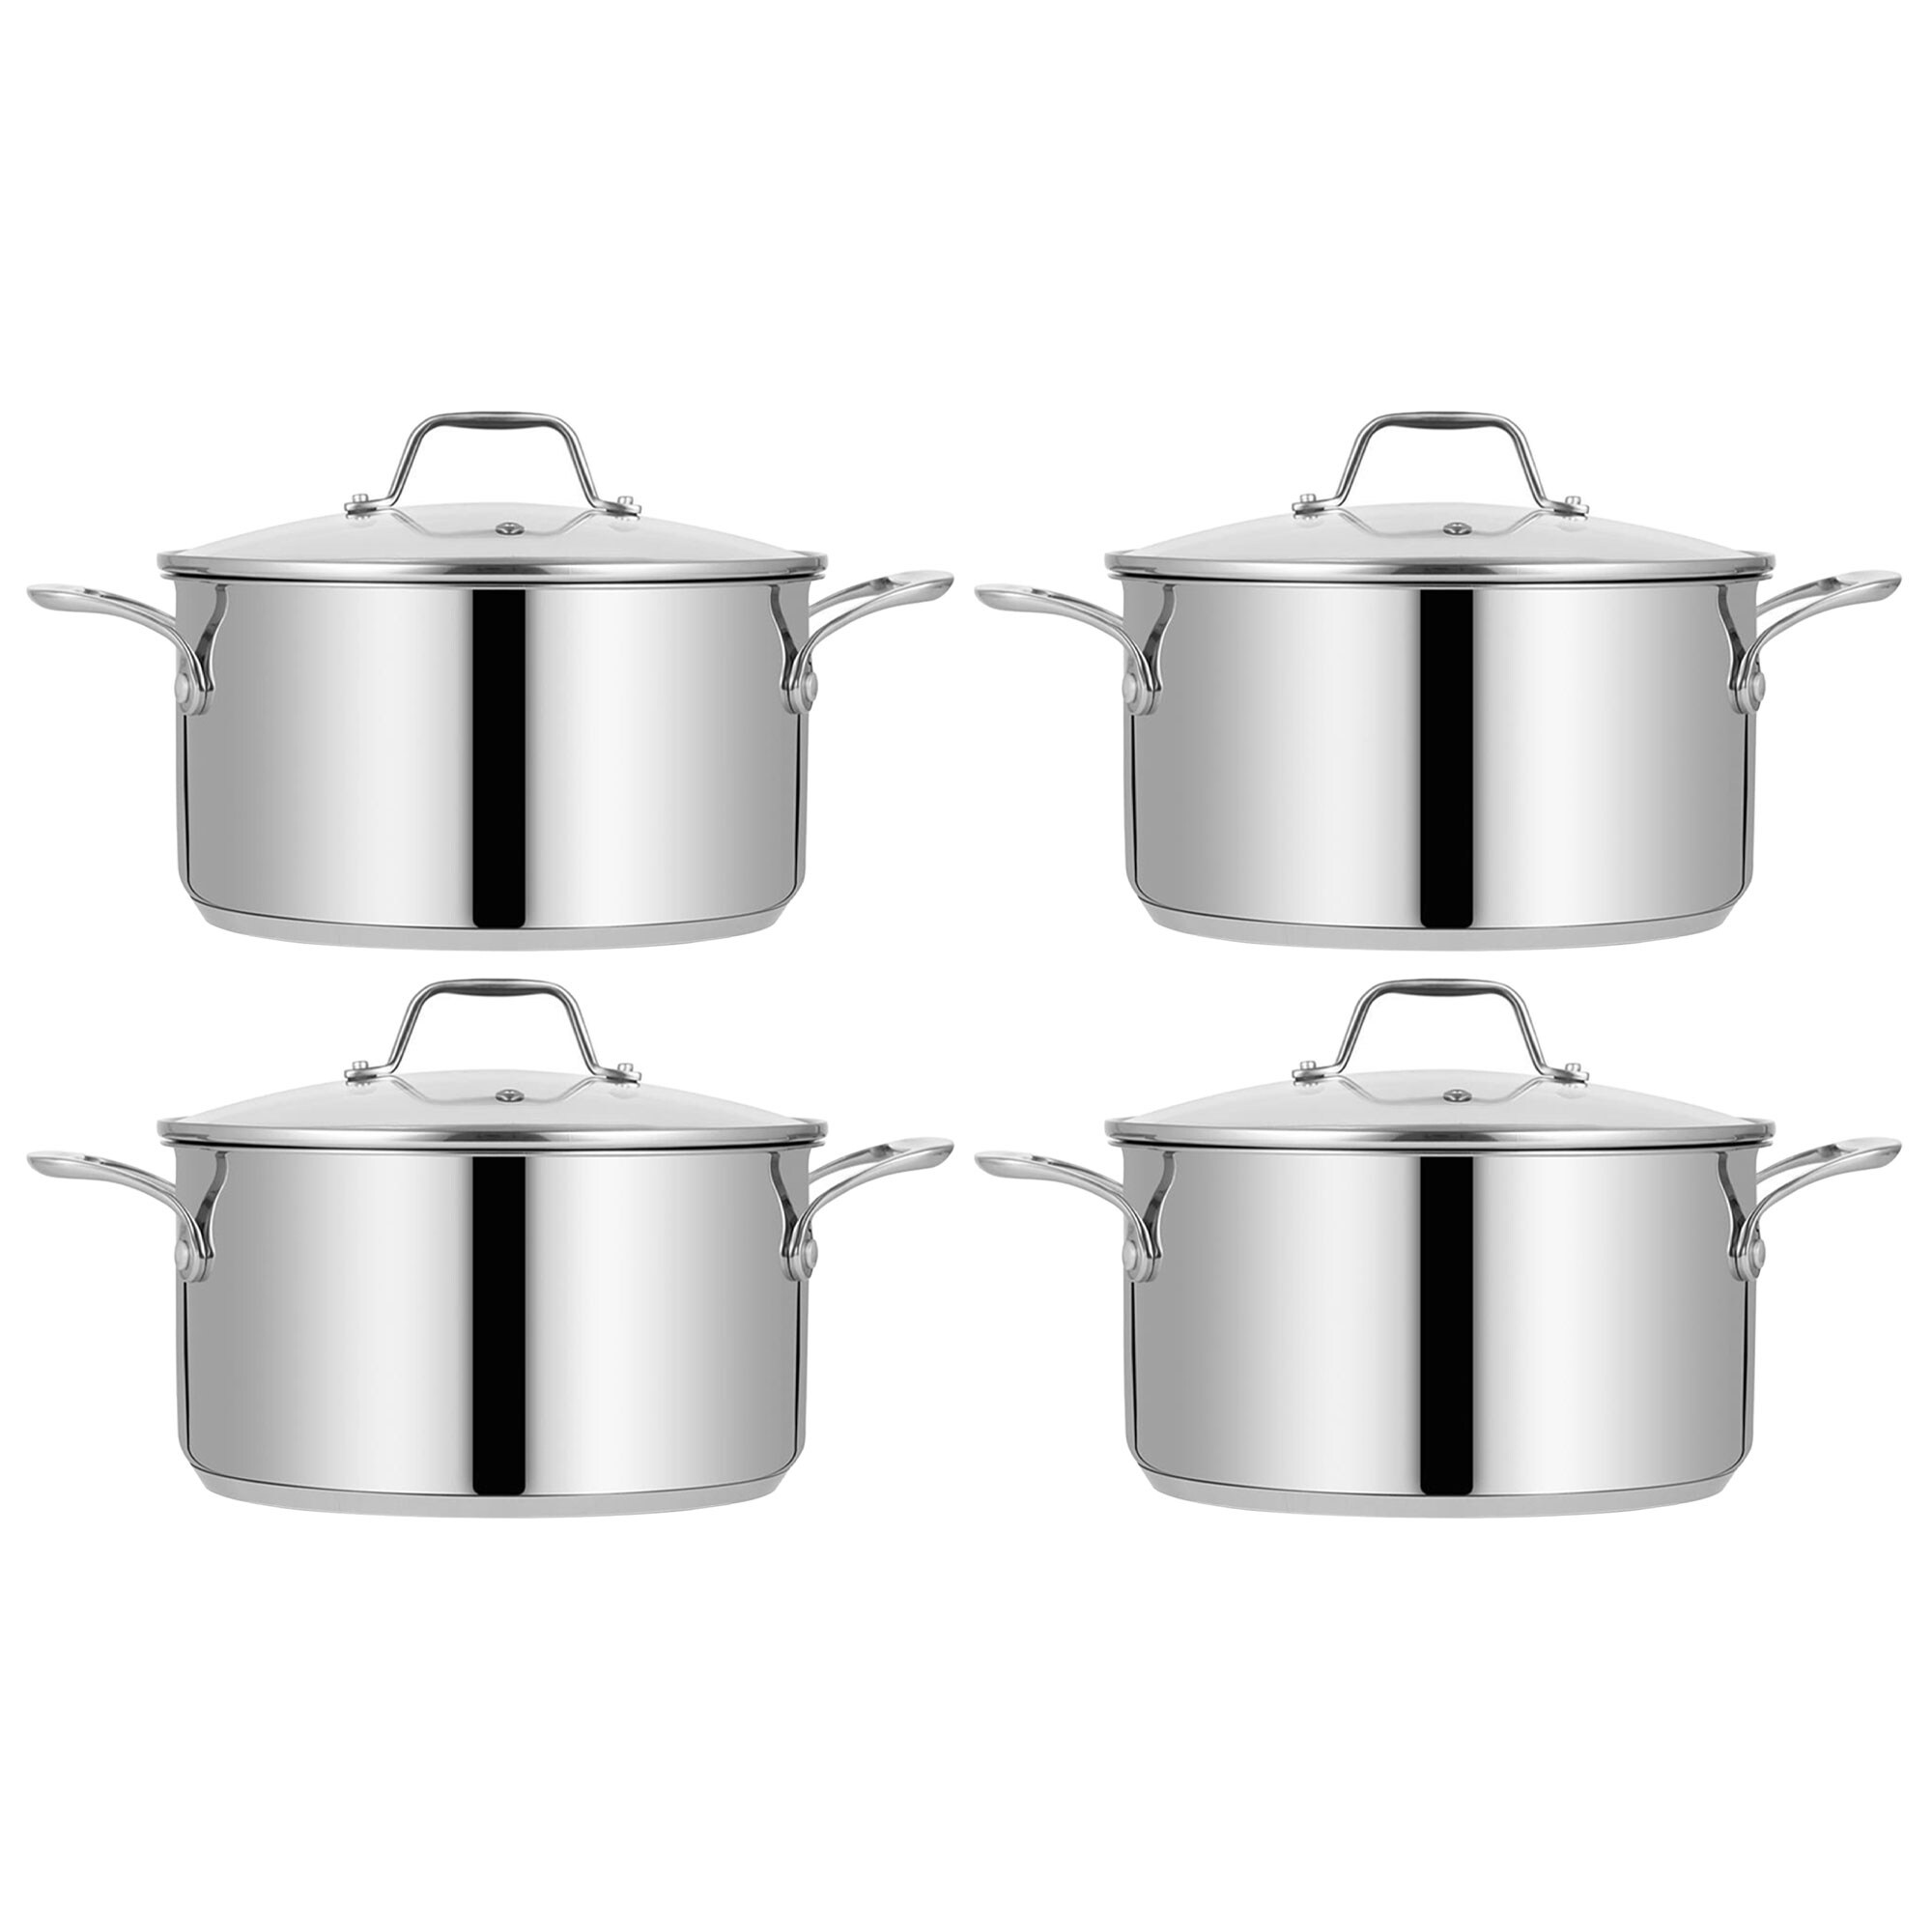 NutriChef Stainless Steel Cookware Stock Pot - 24 Quart, Heavy Duty  Induction Pot, Soup Pot With Stainless Steel